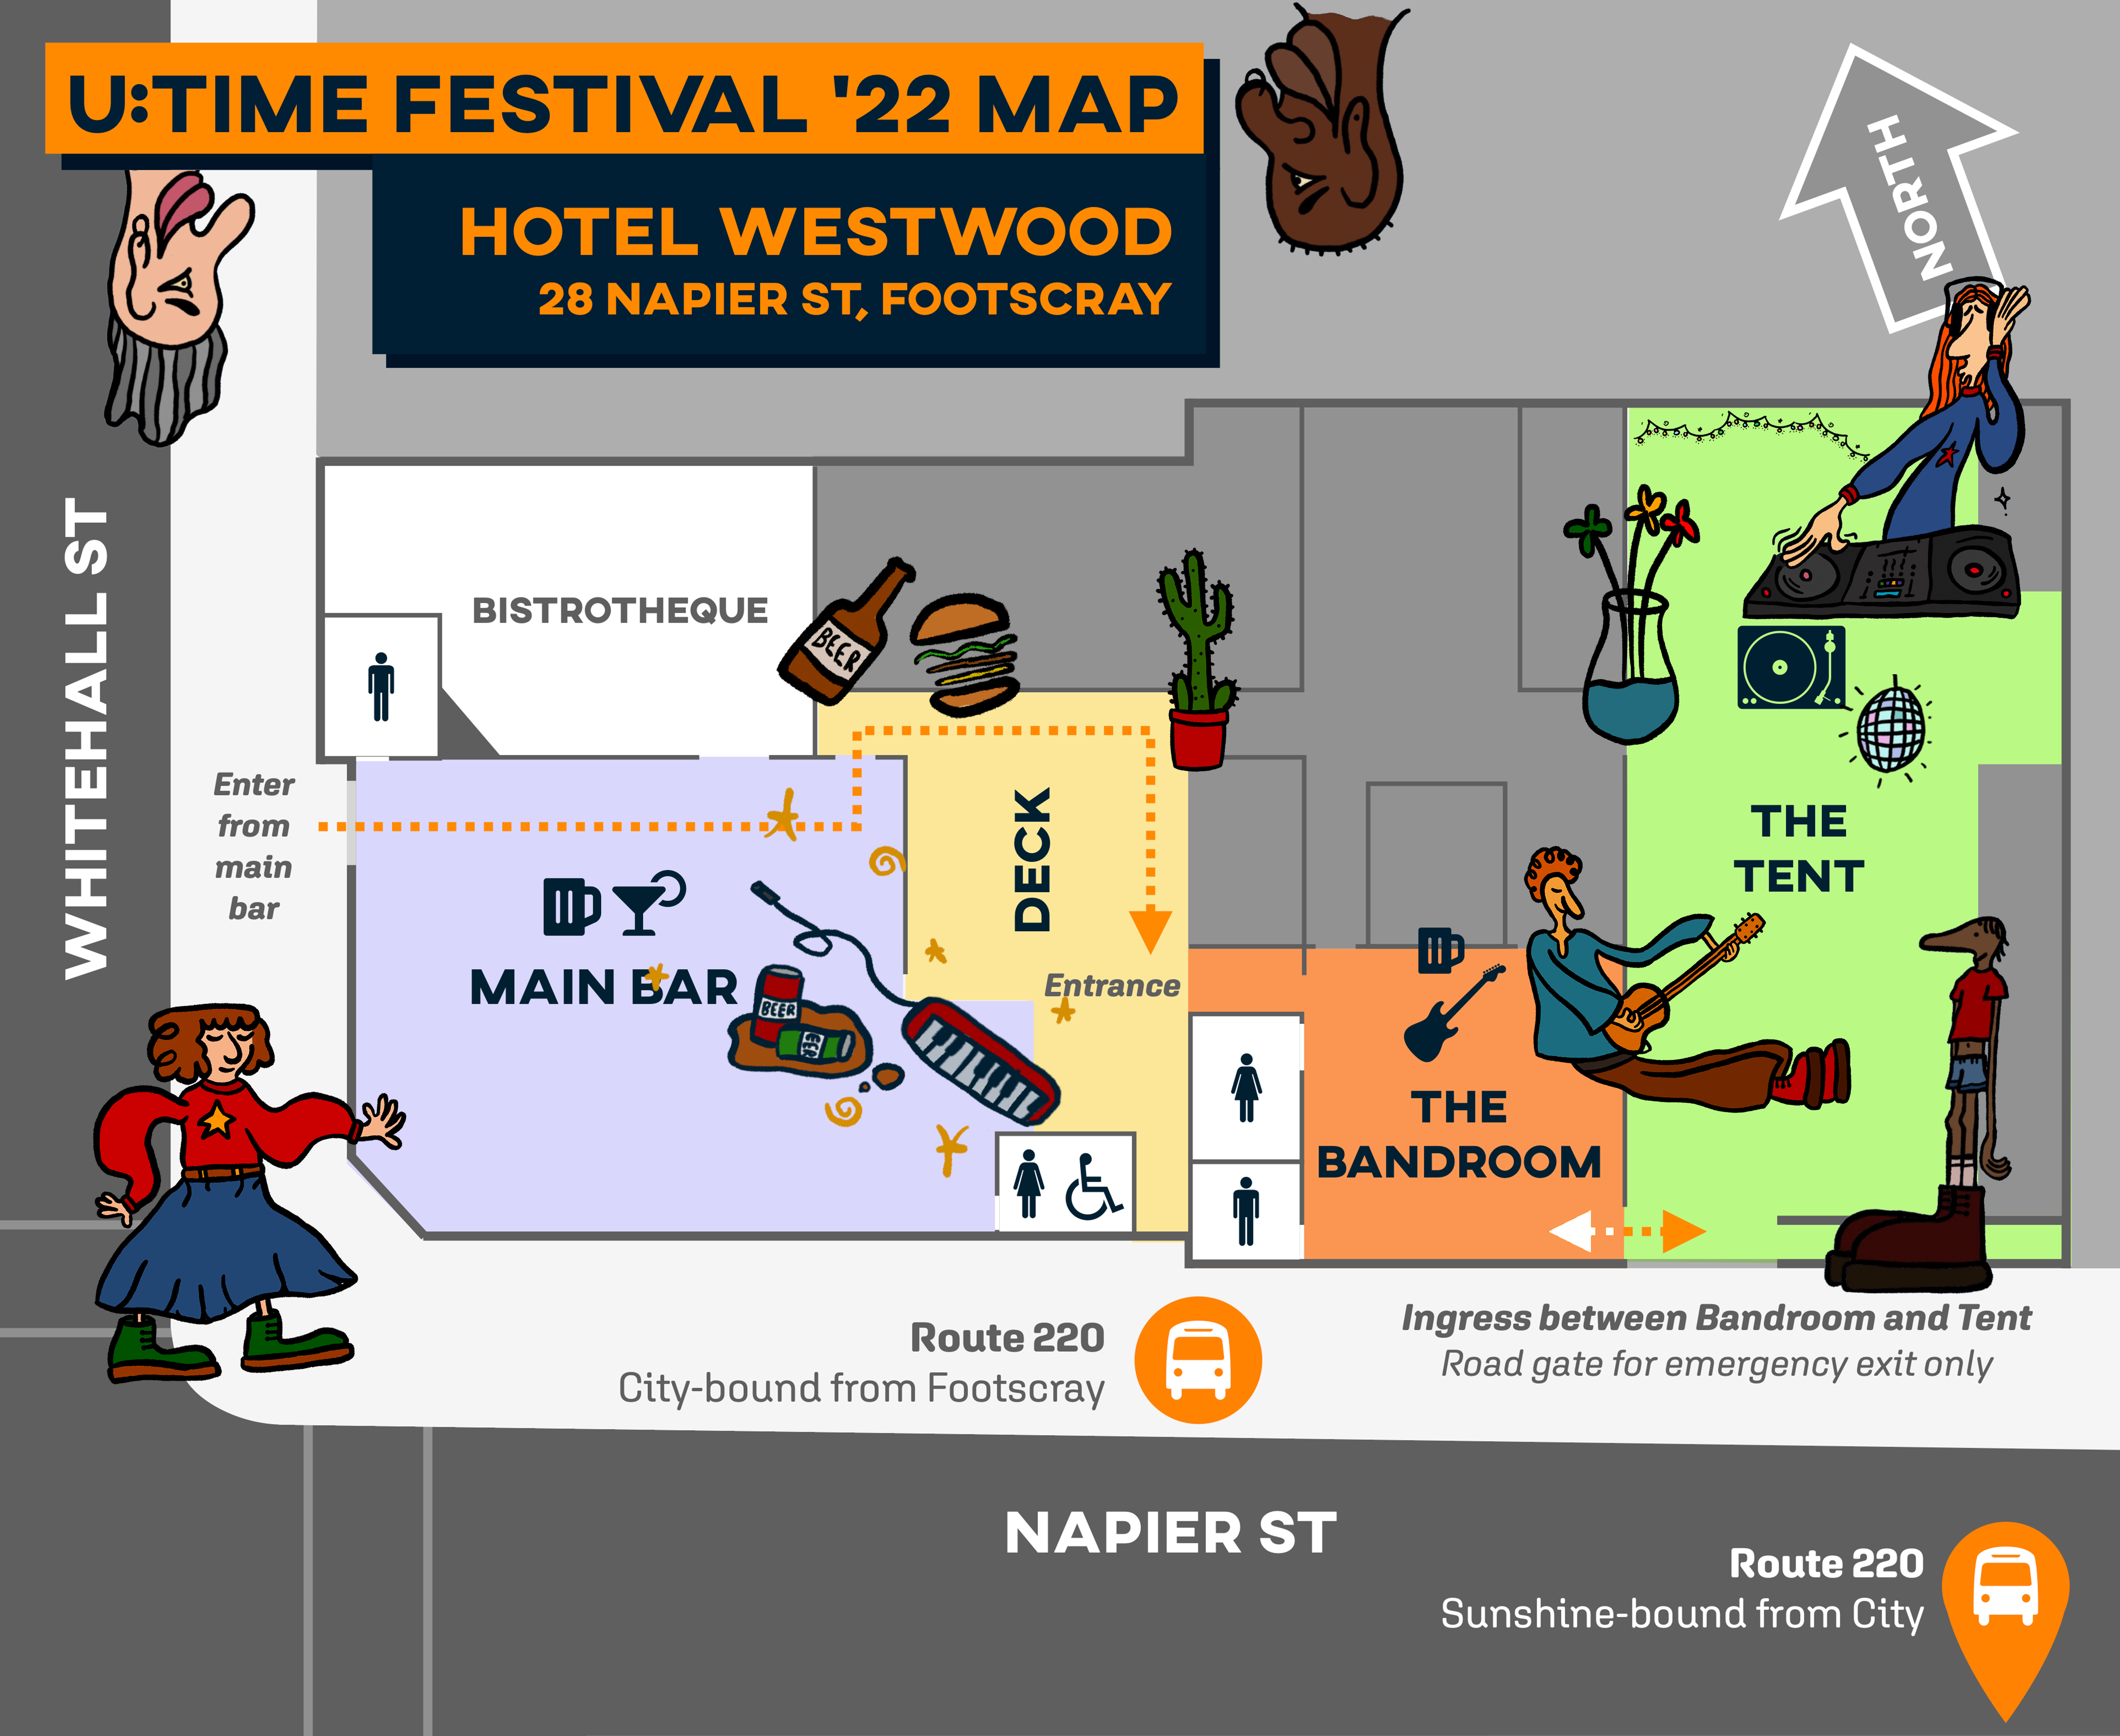 U:Time Festival Map, image showing the venue. Directs patrons to enter through the venue’s front entrance through the deck to the bandroom.